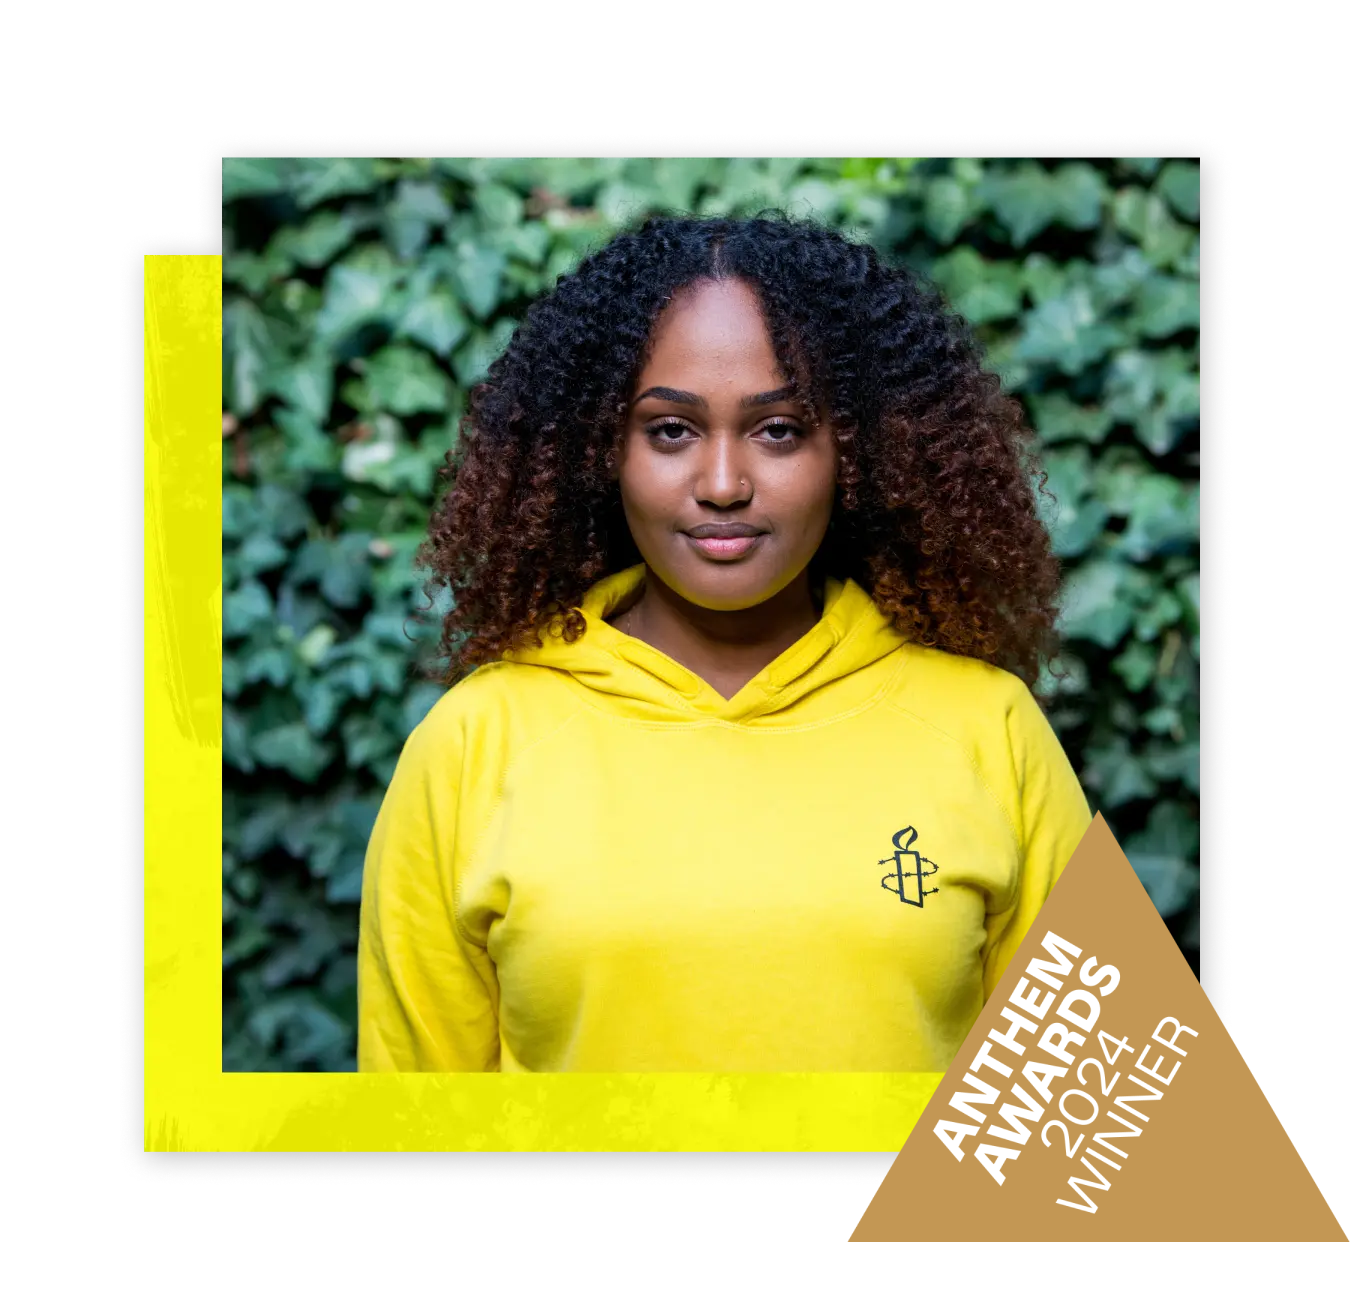 A woman in a bright yellow t-shirt with the Amnesty International logo on it standing in front of a lush green, leafy background. The photo is overlapping a bright yellow square and there is a small badge in the bottom corner that reads 